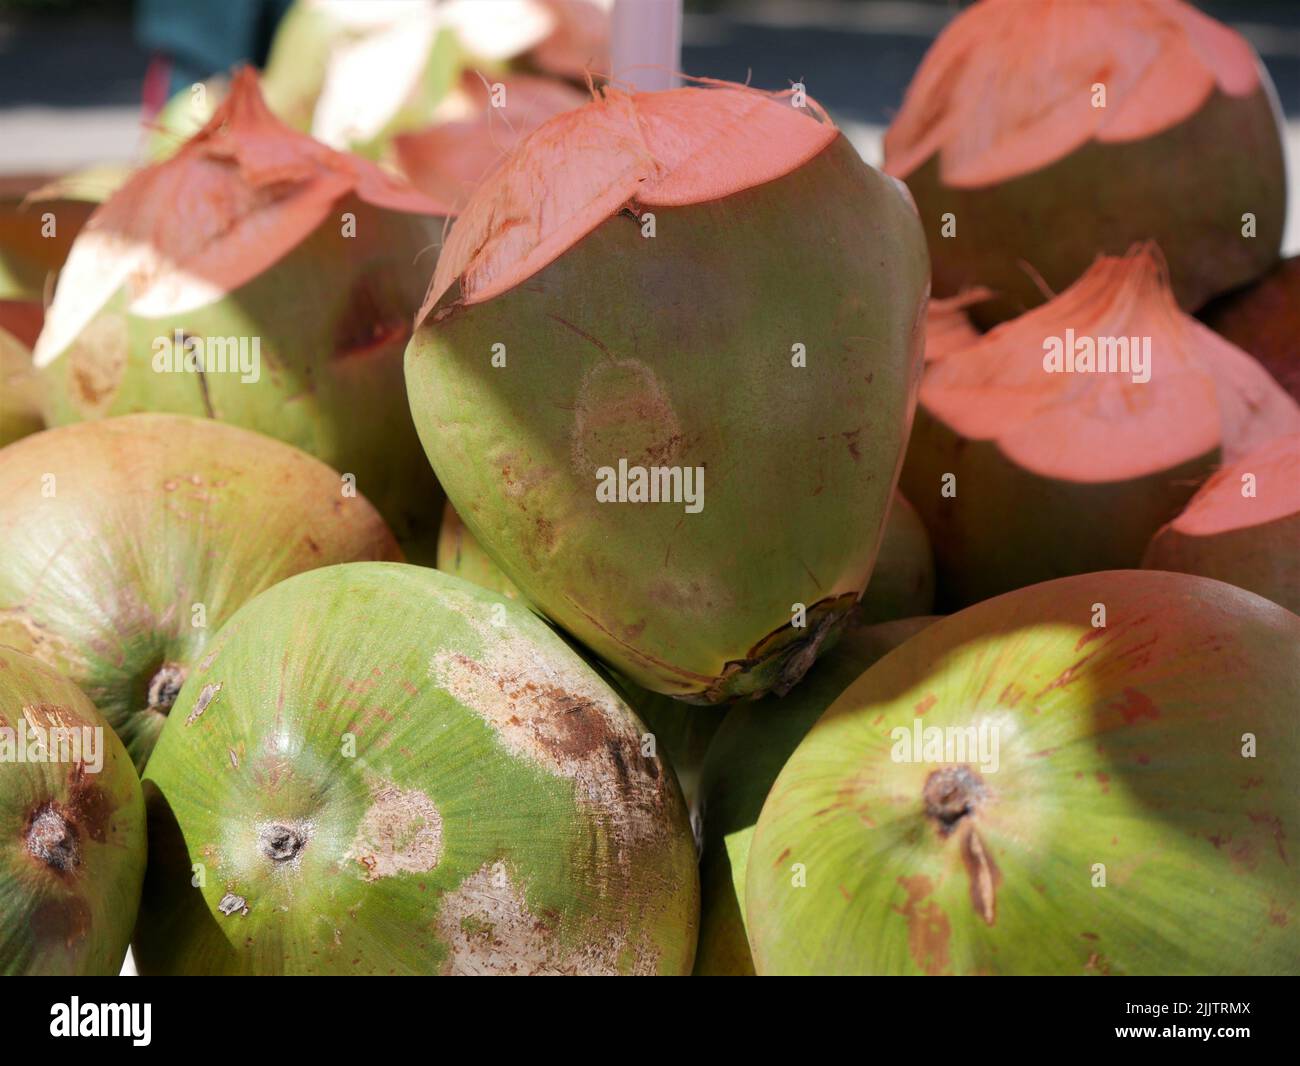 Close up of Coconuts ready for sale on a market stall Stock Photo